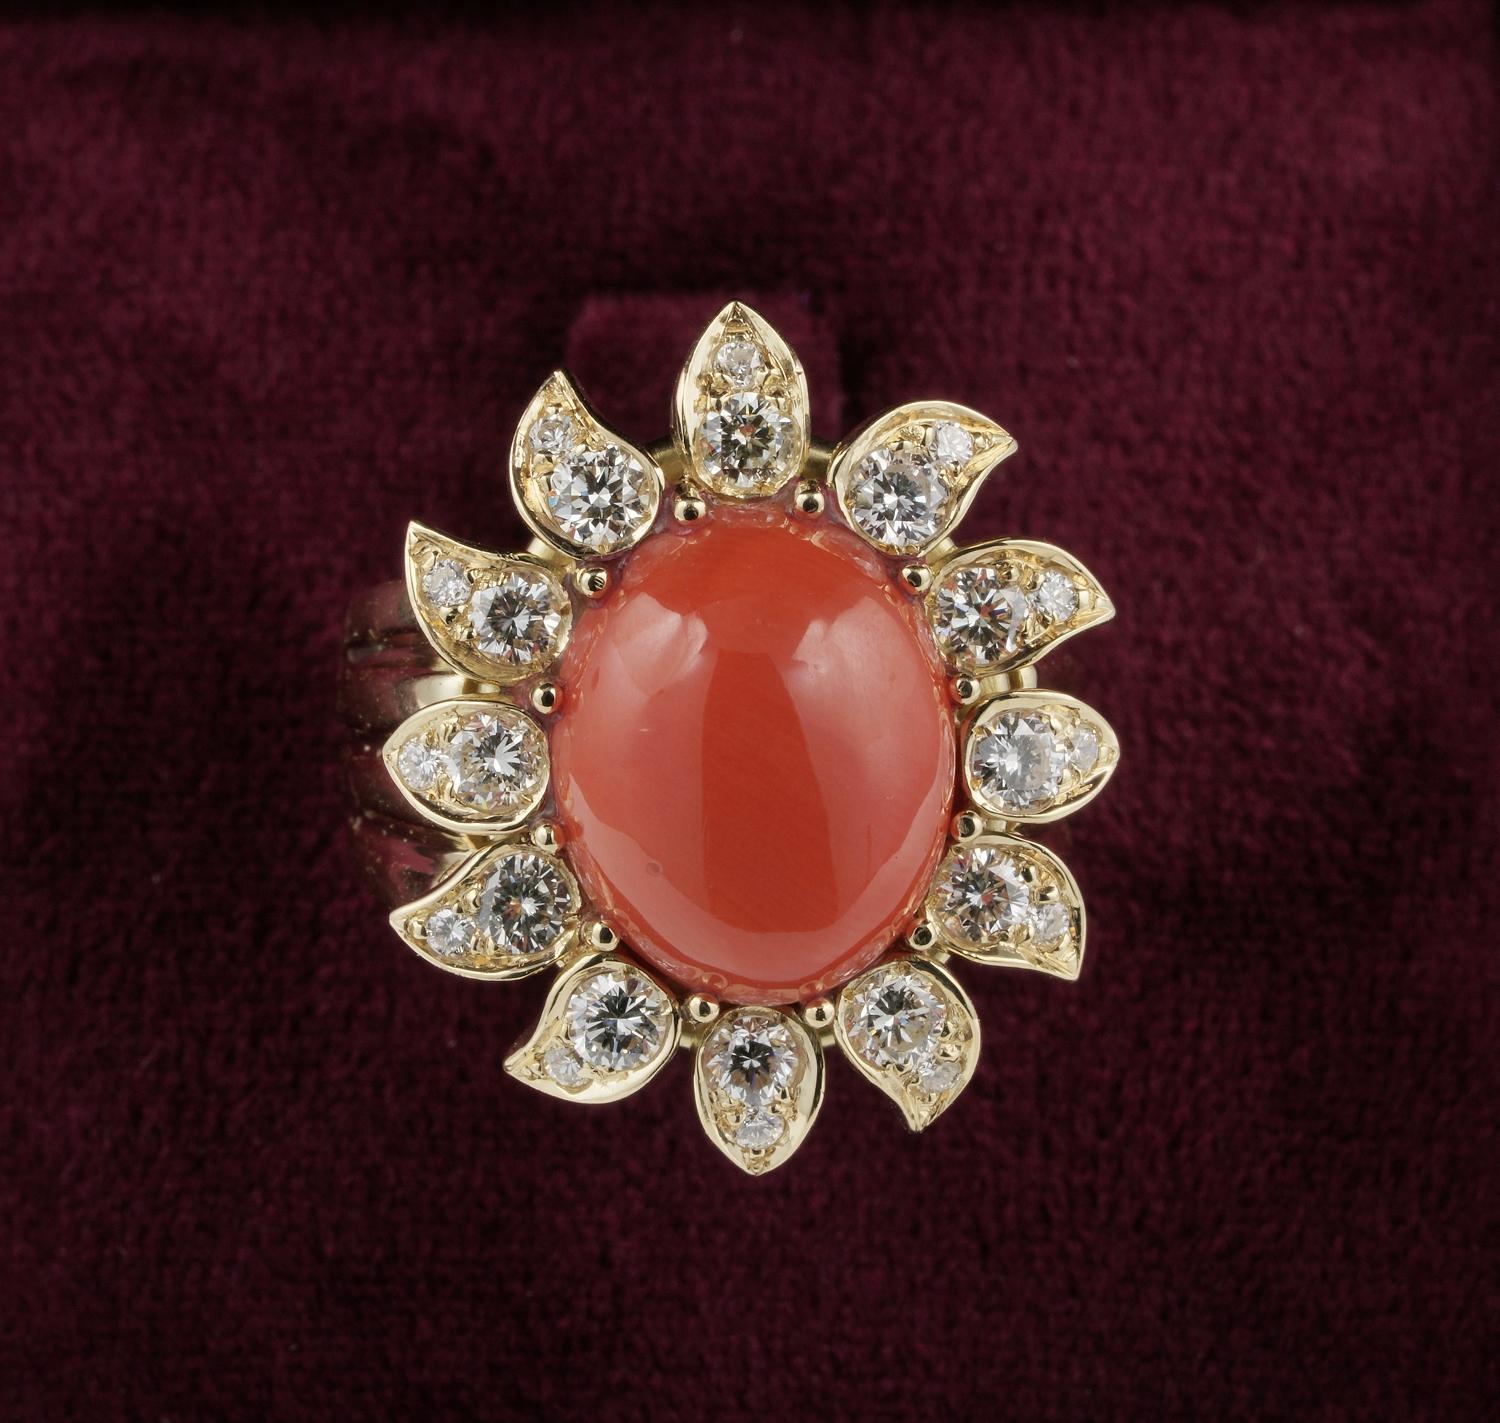 Luxury Coral

This top end quality 100% natural untreated Coral of amazing Red Salmon colour is the star of this ring
Large flower shaped, beautiful hand crafted as unique individual piece of heavy solid 18 KT gold, dates 1980 ca
Italian